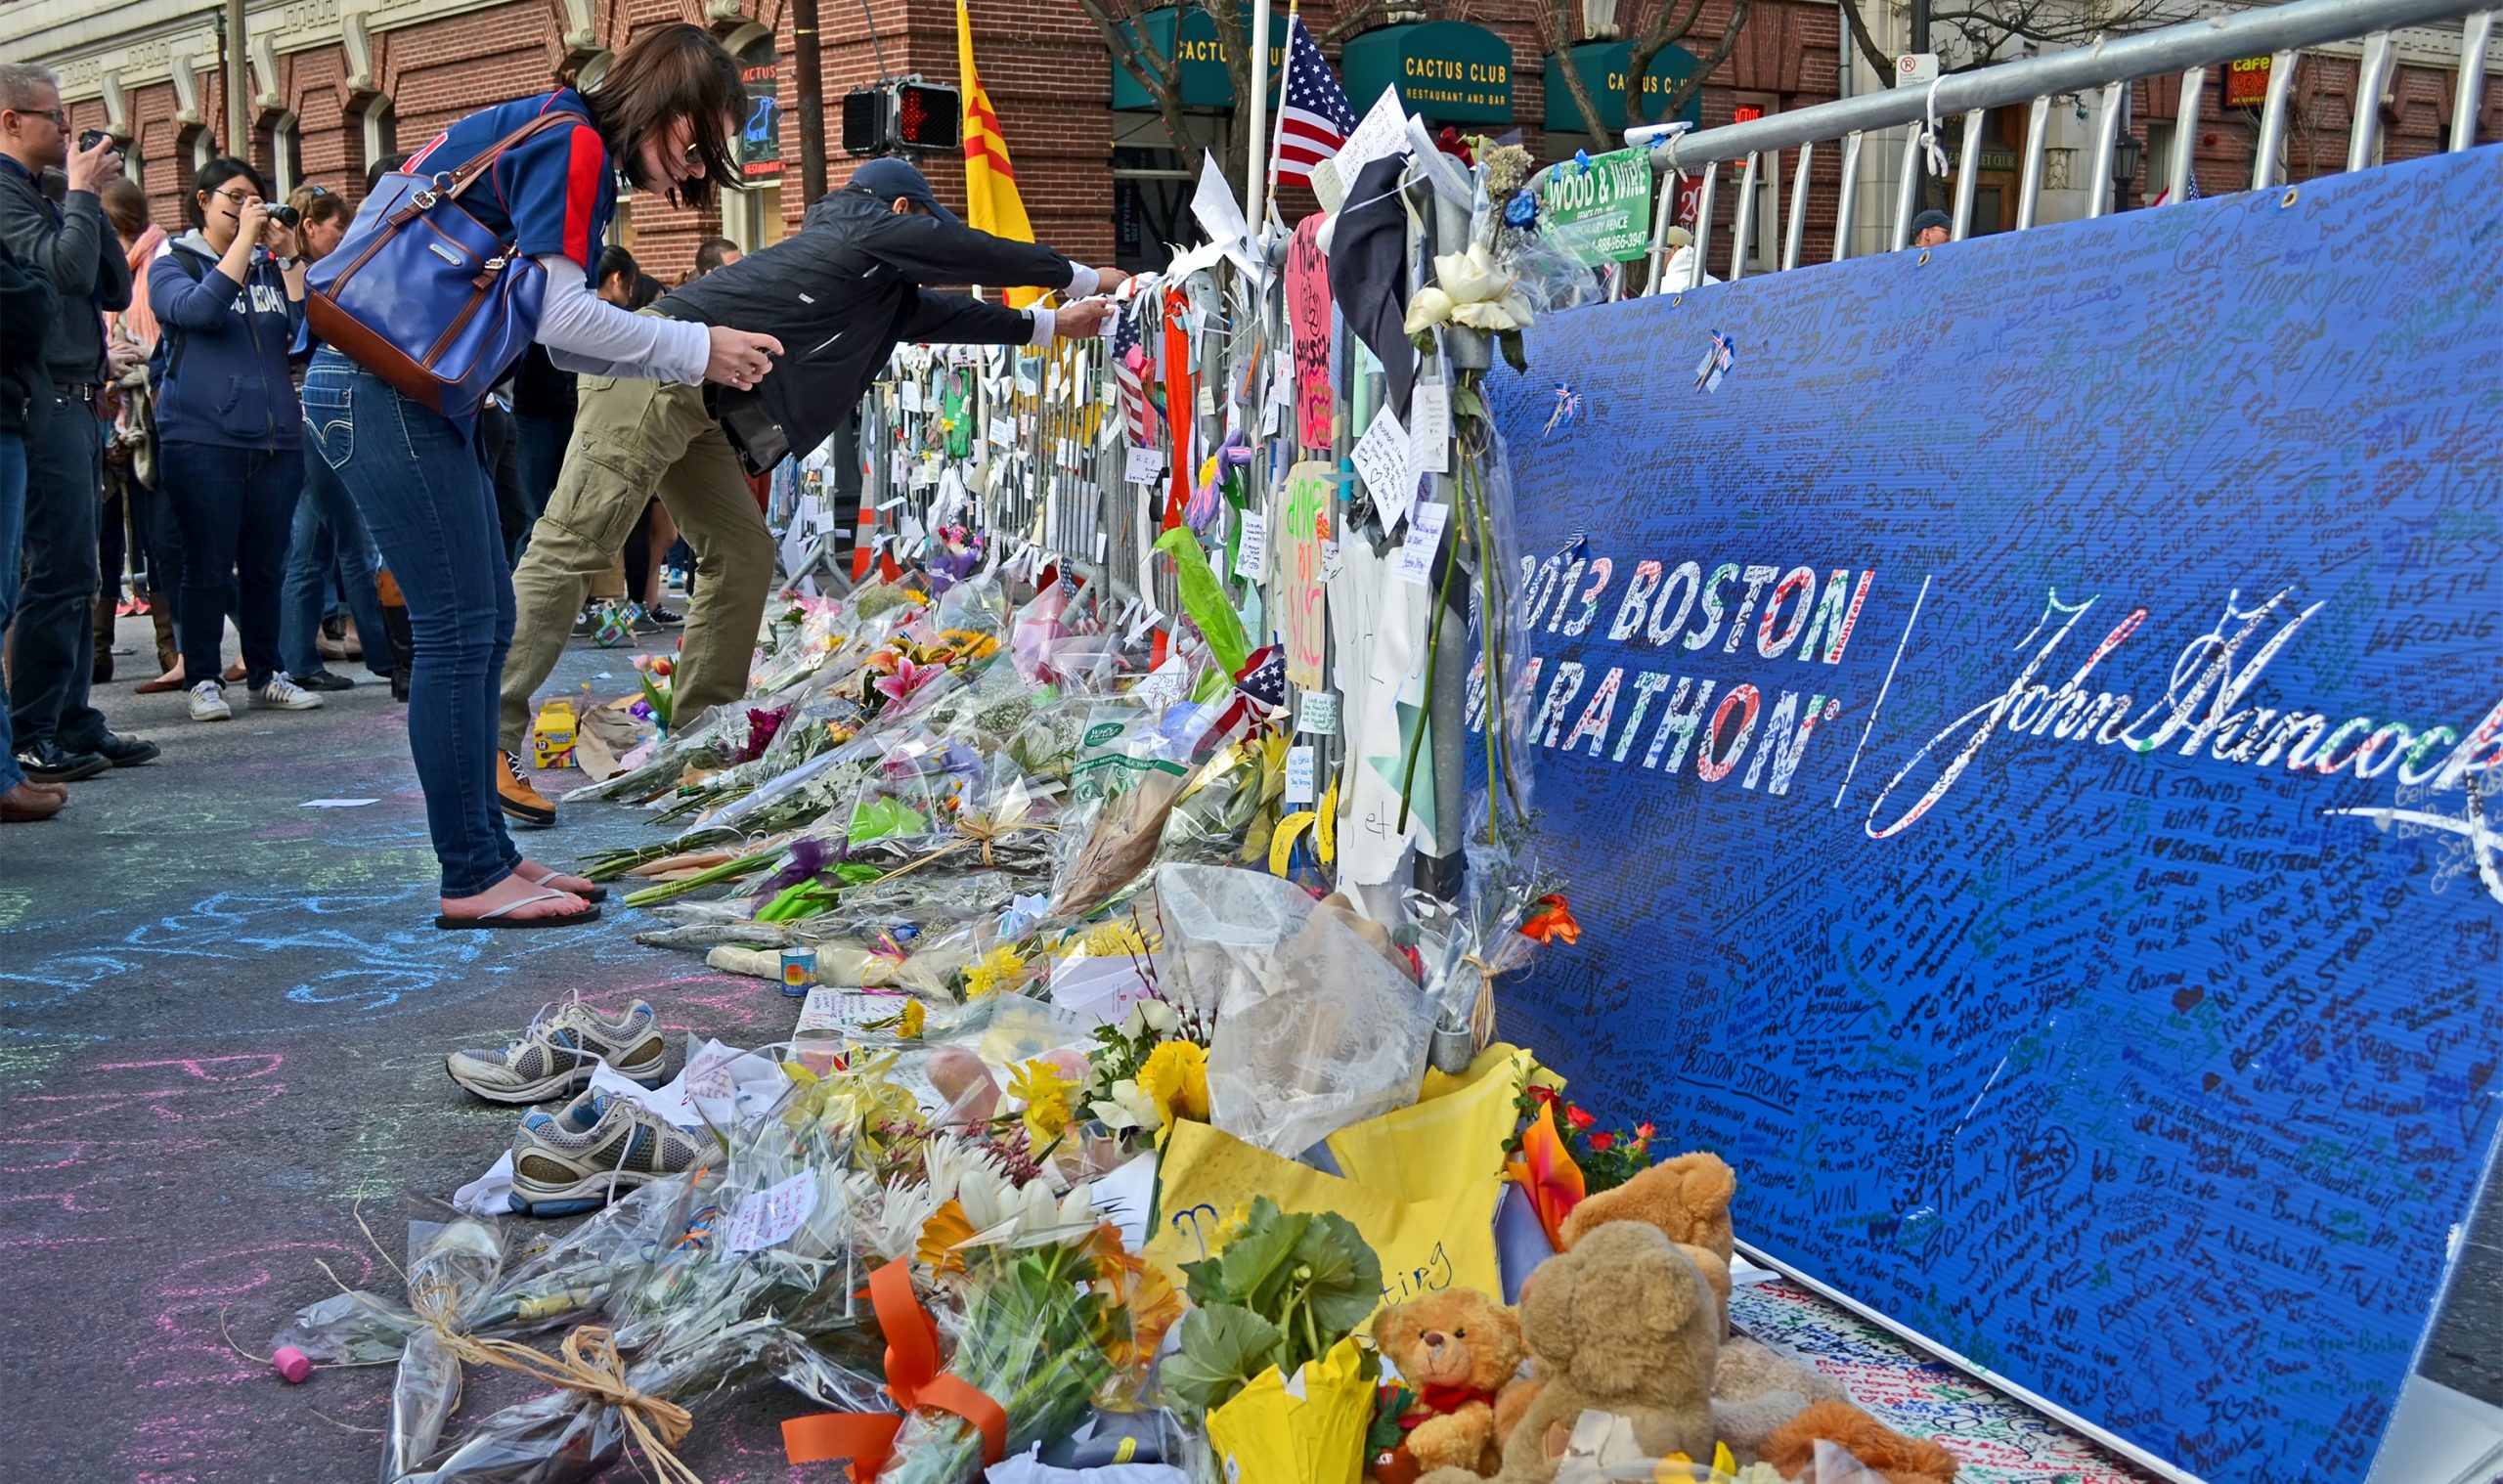 woman leaning over a street memorial of flowers, cards, and tennis shoes for the Boston Marathon bombing victims